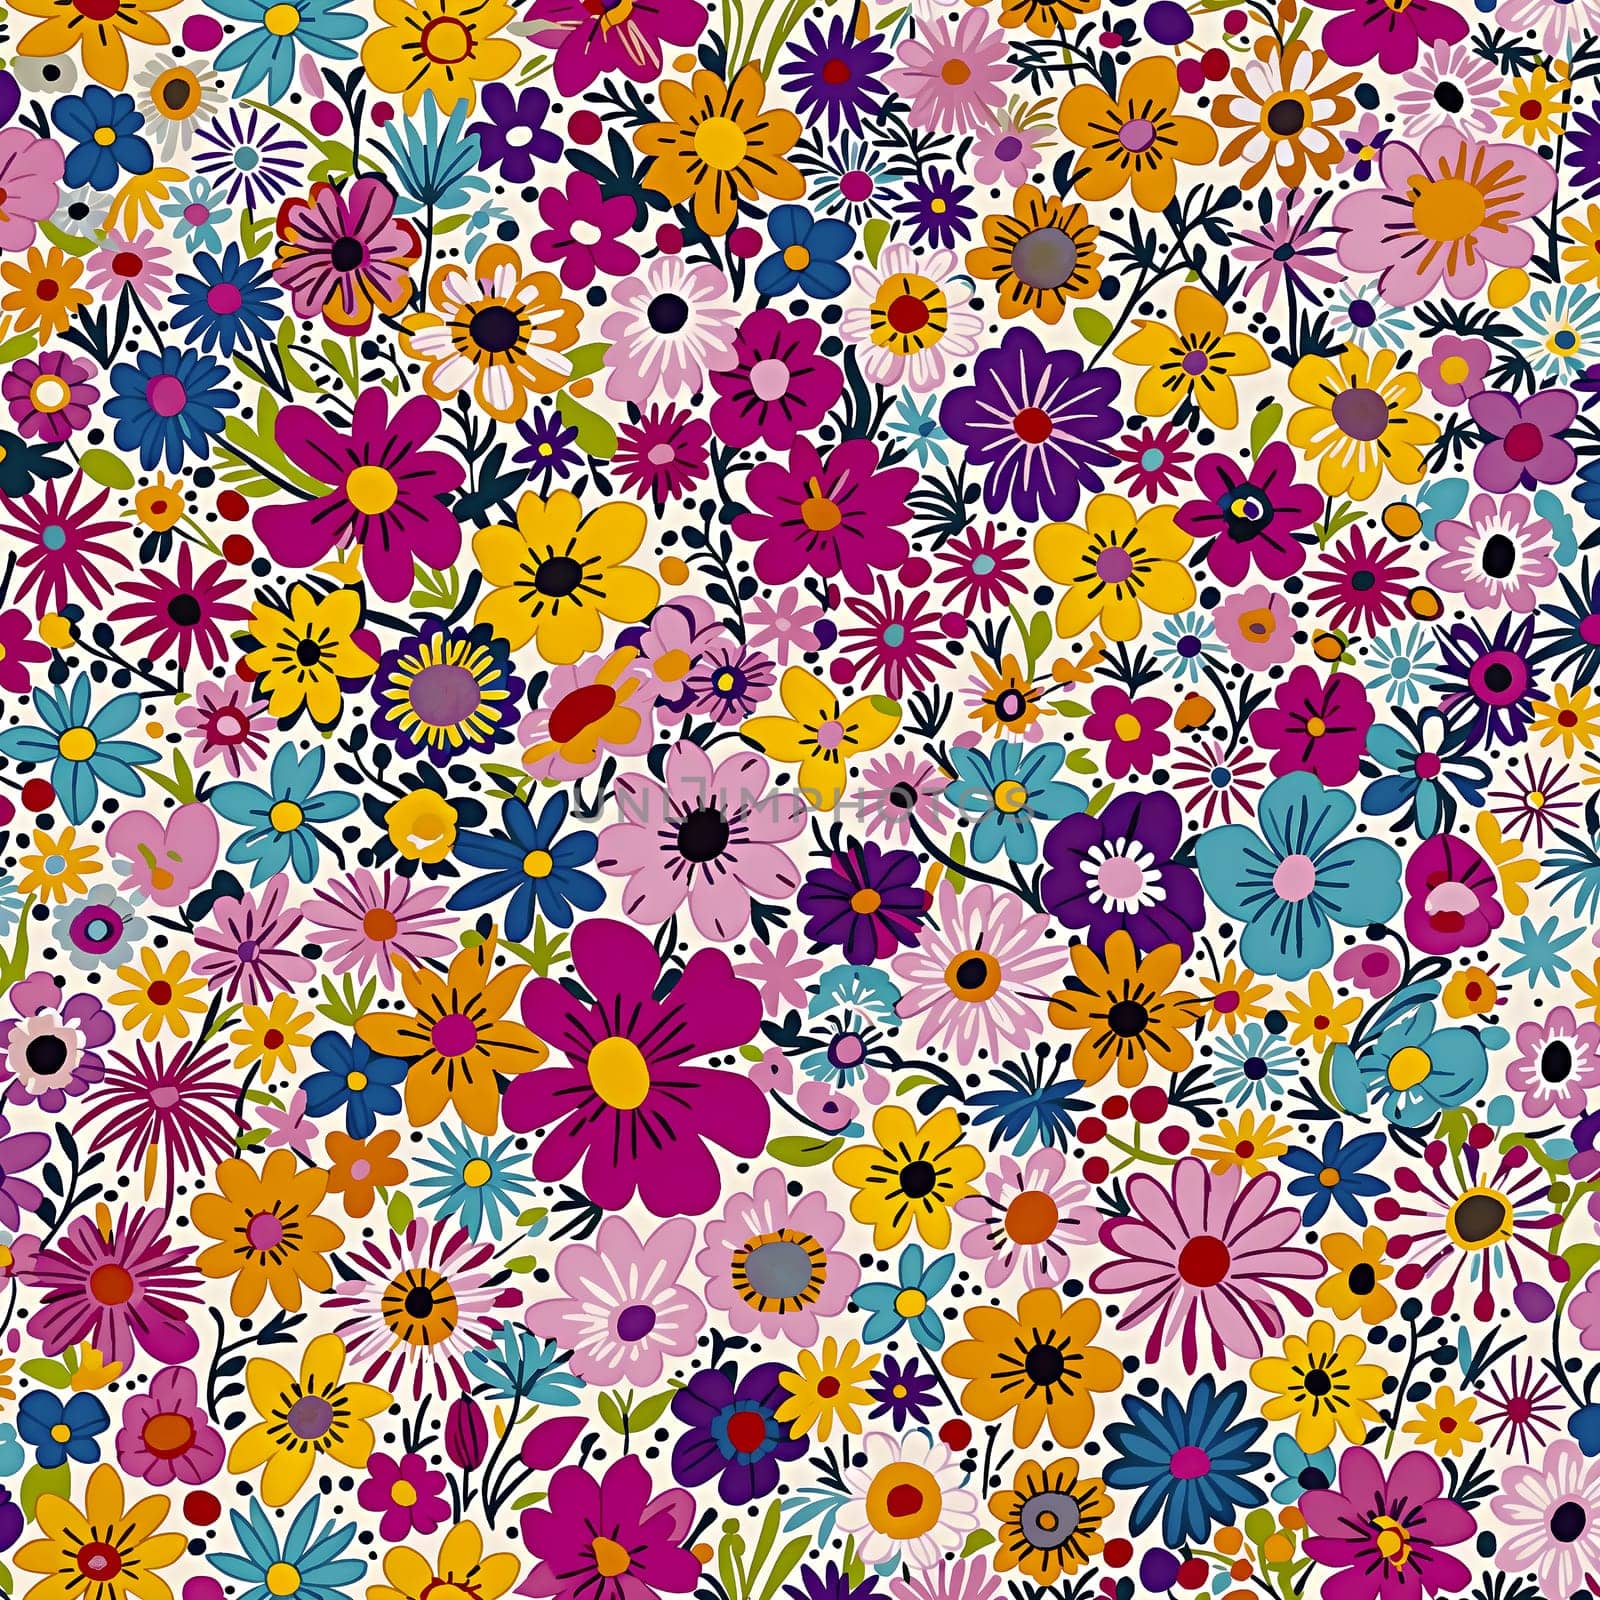 Colorful Floral Pattern illustration by chrisroll